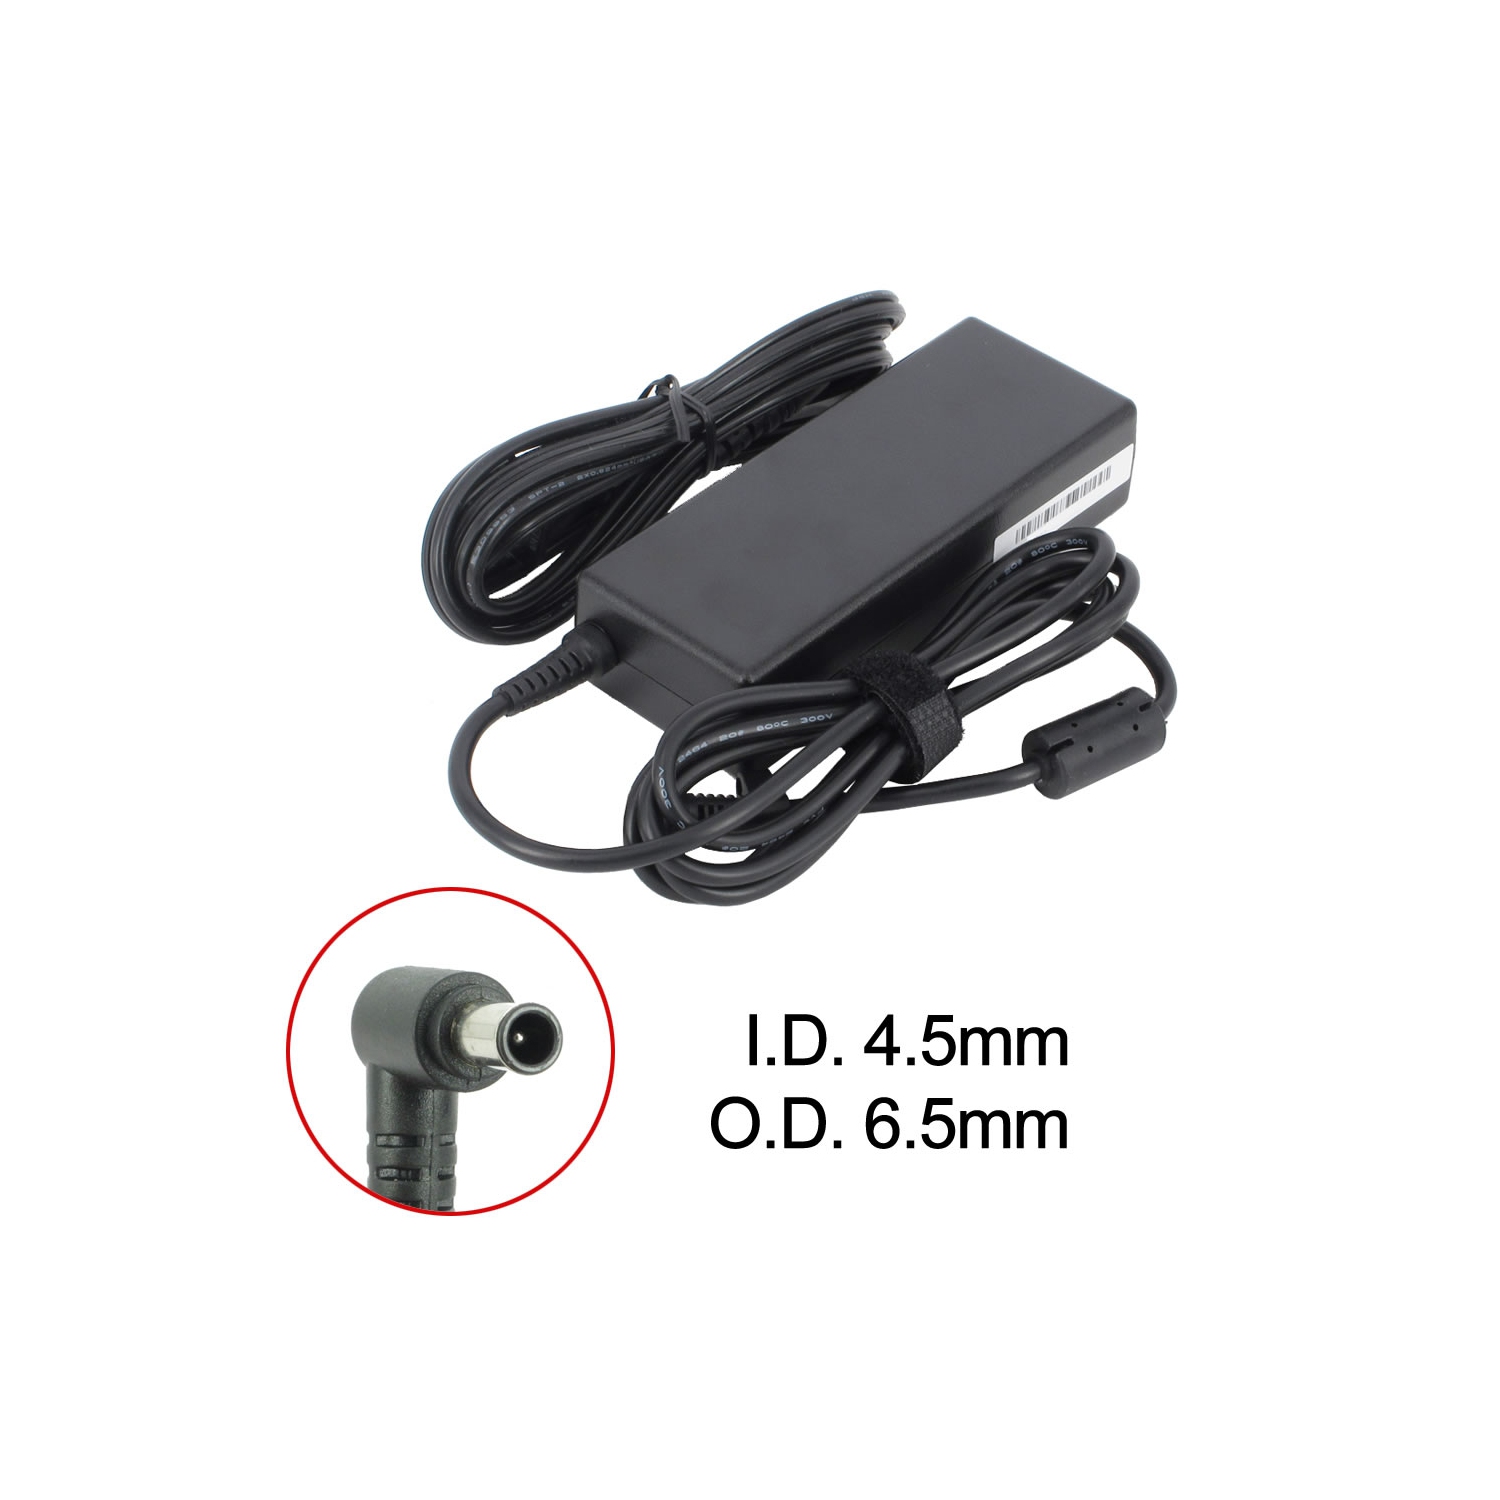 Brand New Laptop AC Adapter for LG XNOTE X140, ADP-90TH A, PCGA-AC19V19, VGP-AC19V14, VGP-AC19V26, VGP-AC19V43